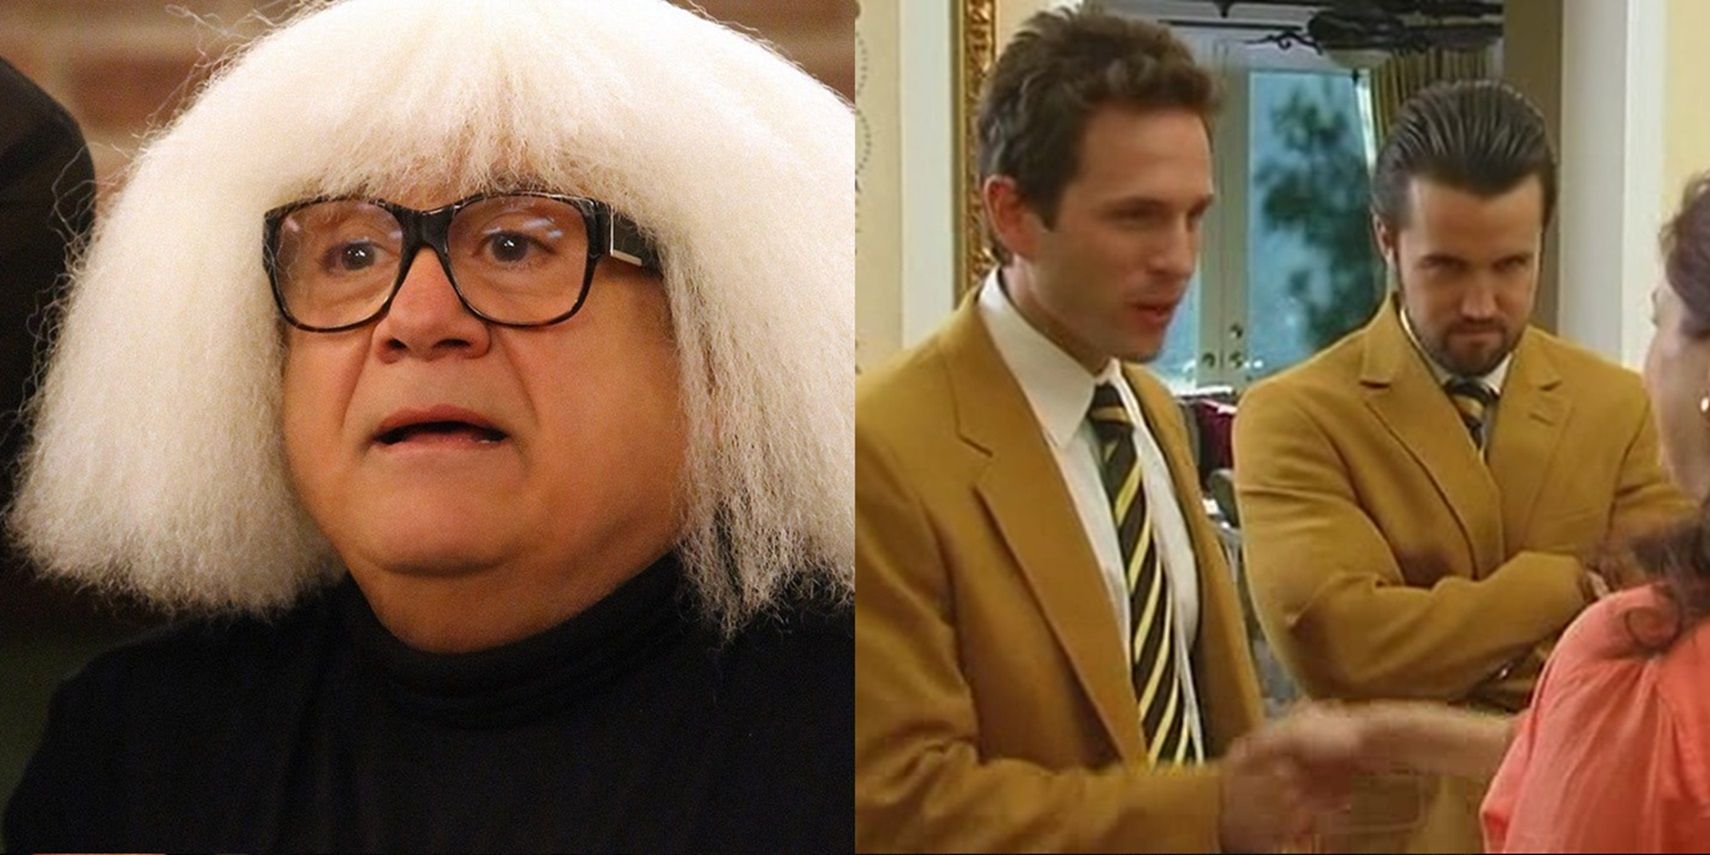 Ongo Gablogian & 8 Other Hilarious Alter Egos In It's Always Sunny...